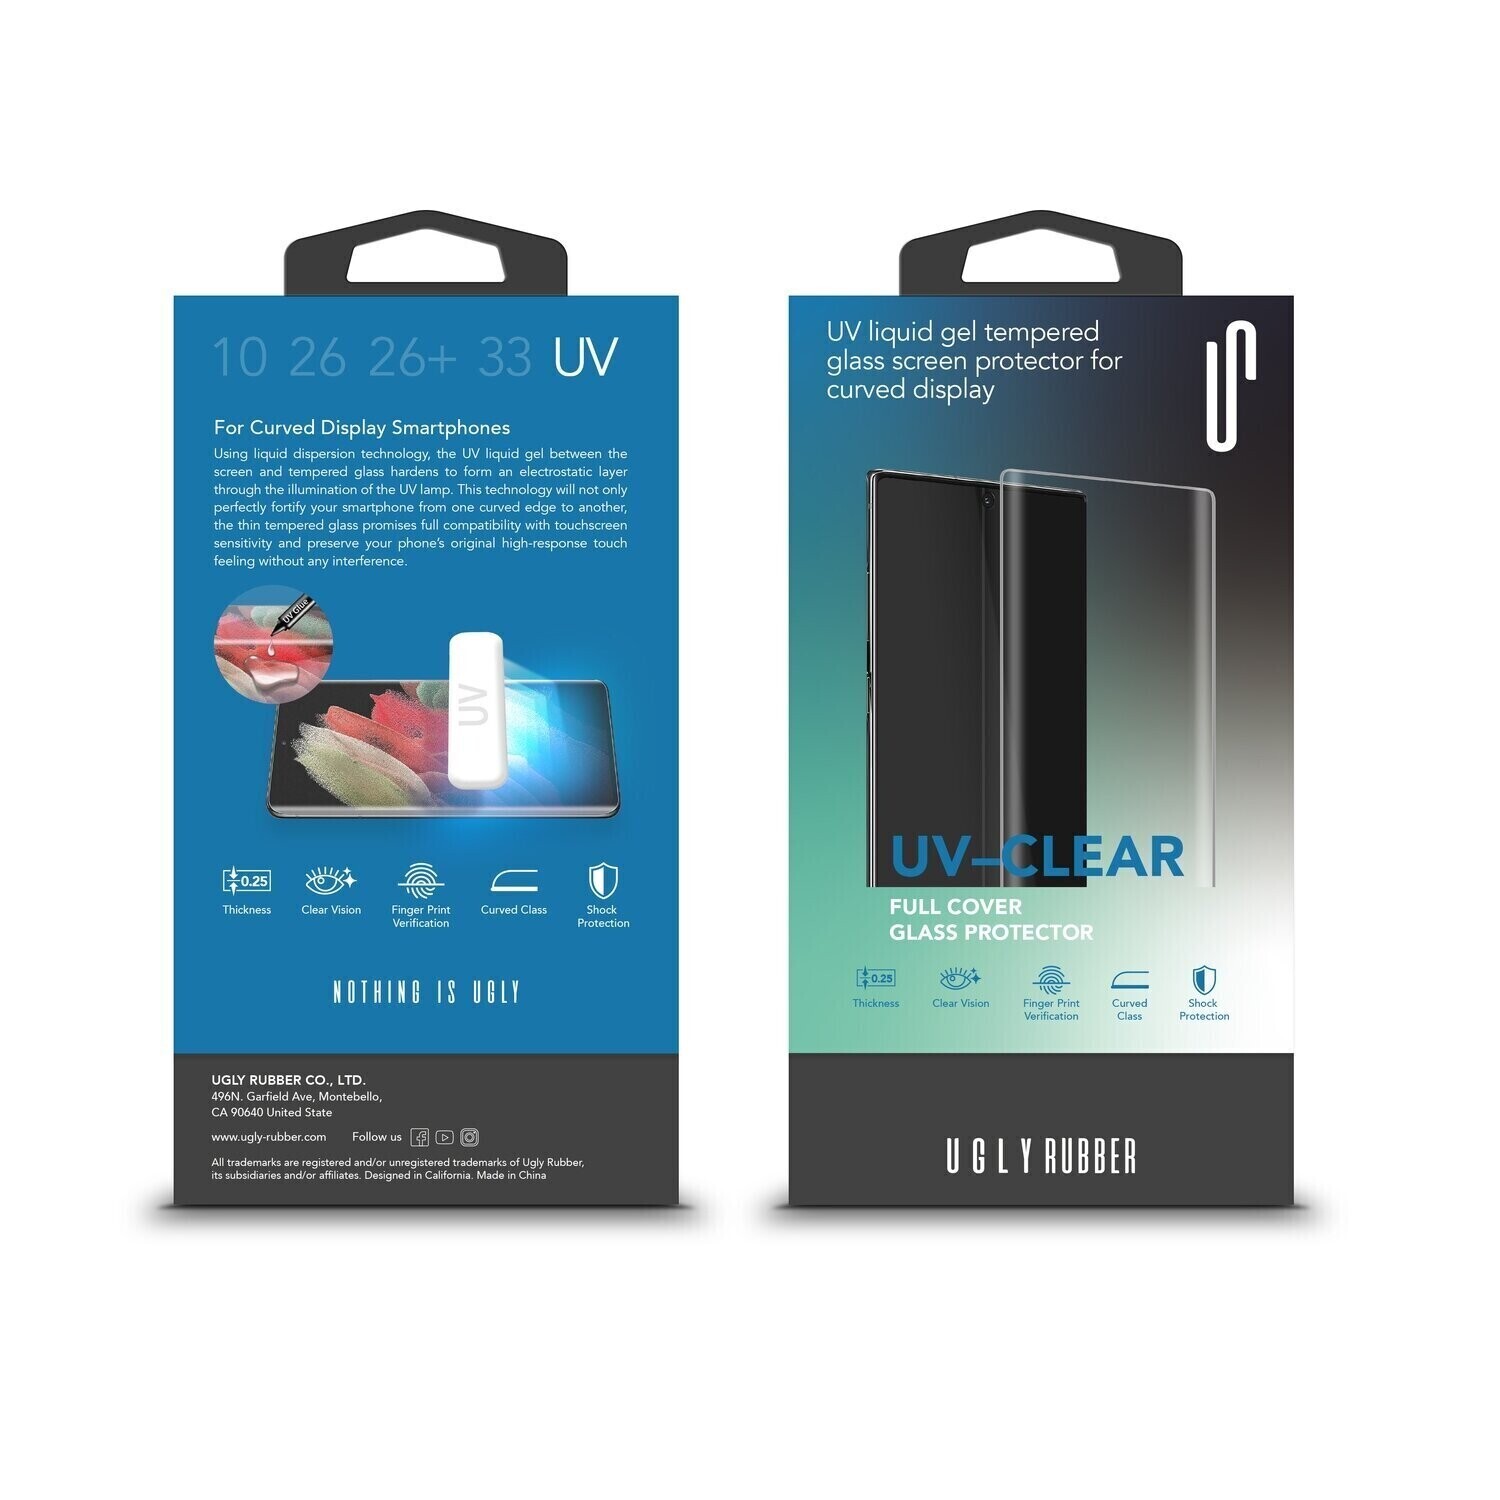 Ugly Rubber Oneplus 8 UV Liquid Gel Tempered Glass, Clear (Screen Protector)